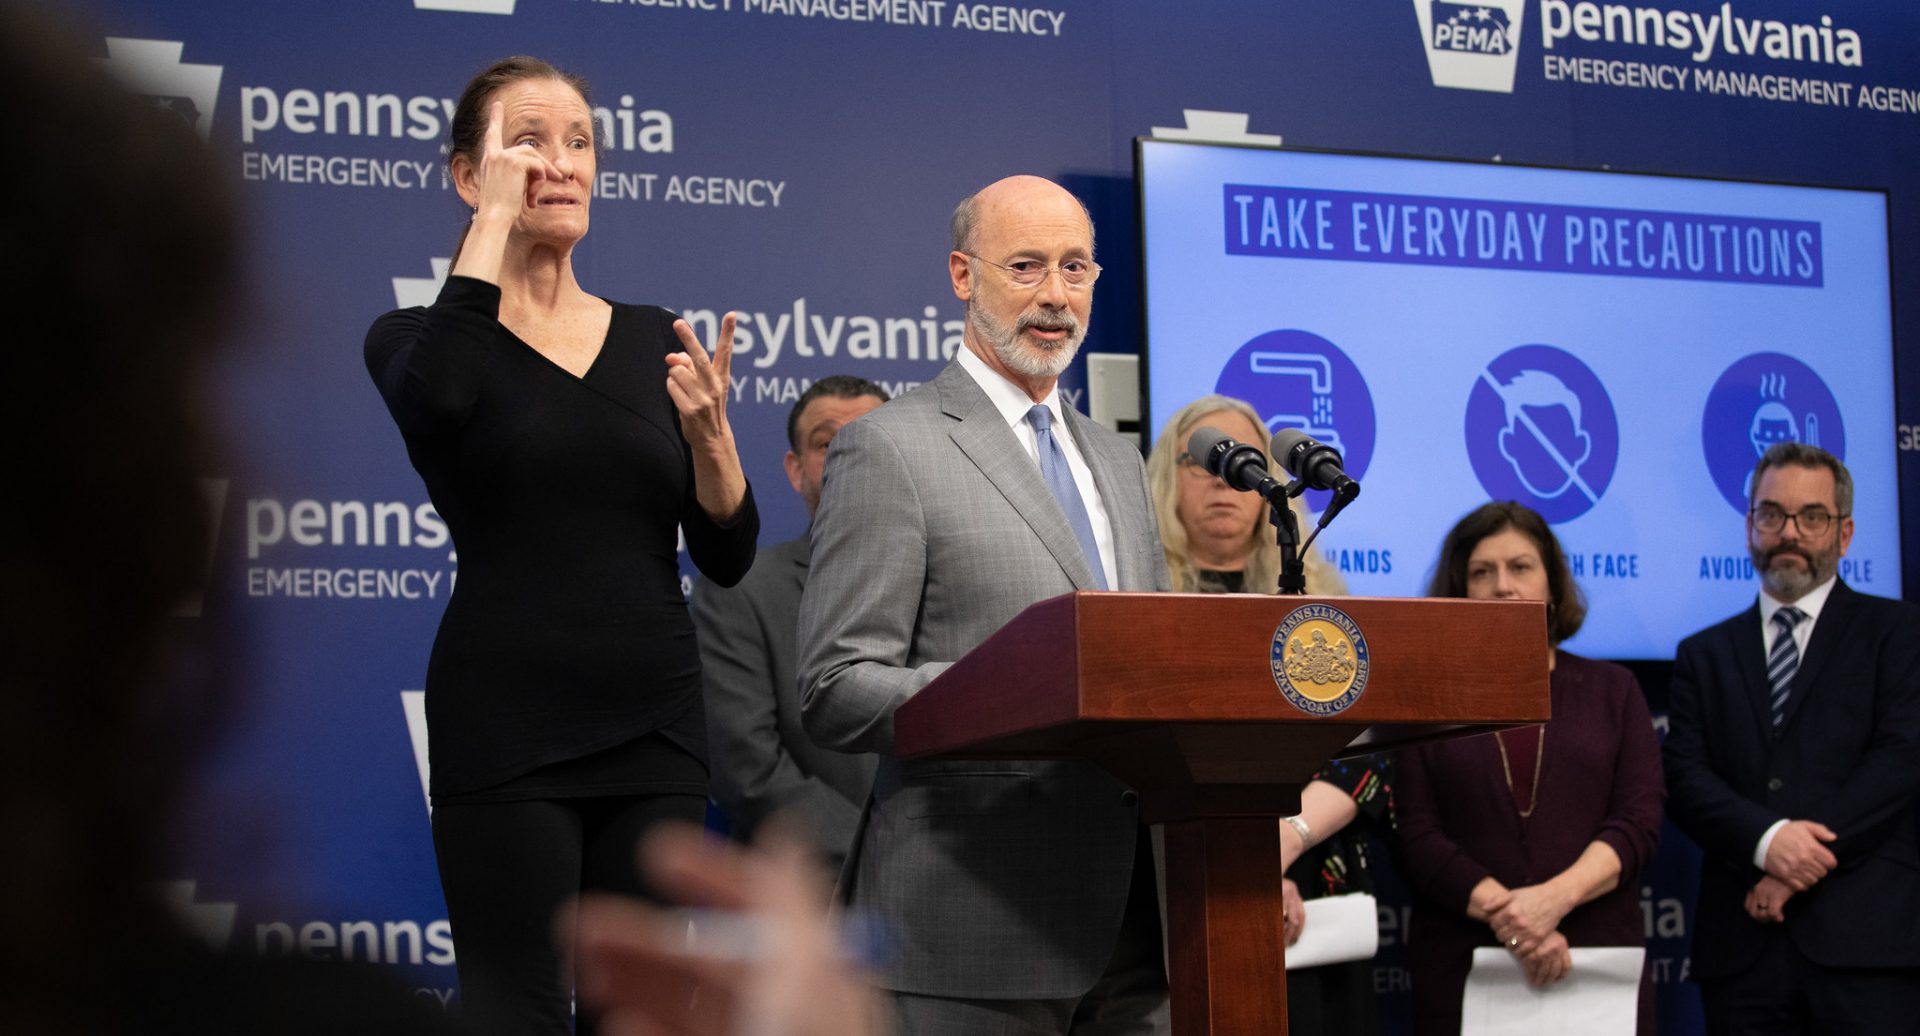 Gov. Tom Wolf answers questions during a March 13, 2020, press conference about efforts to mitigate the coronavirus in Pennsylvania.